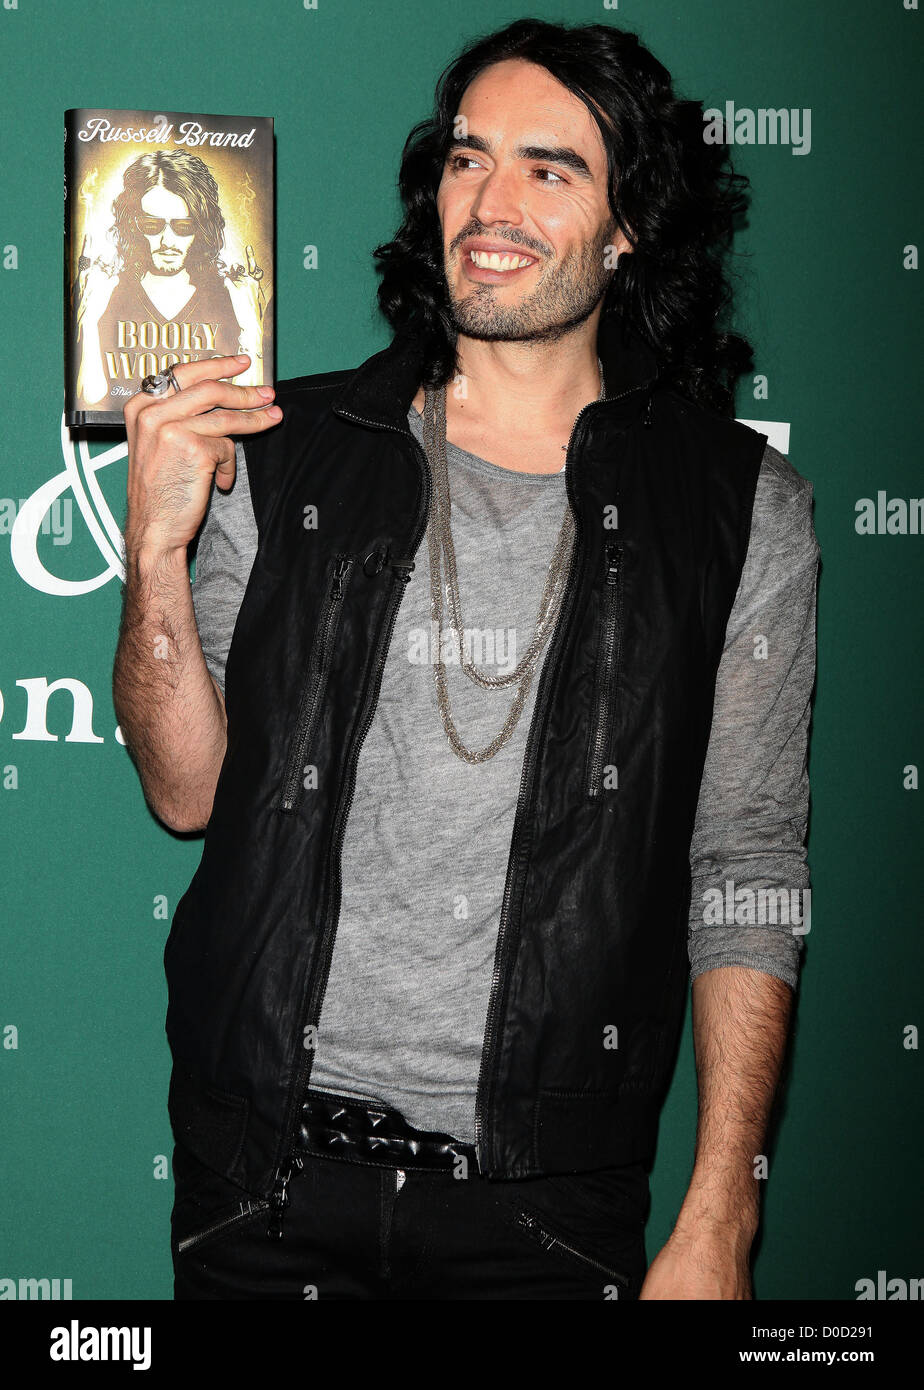 Russell Brand bei Signierstunde für "Booky Wook 2: This Time It Personal" bei Barnes & Ble New York City, USA Stockfoto